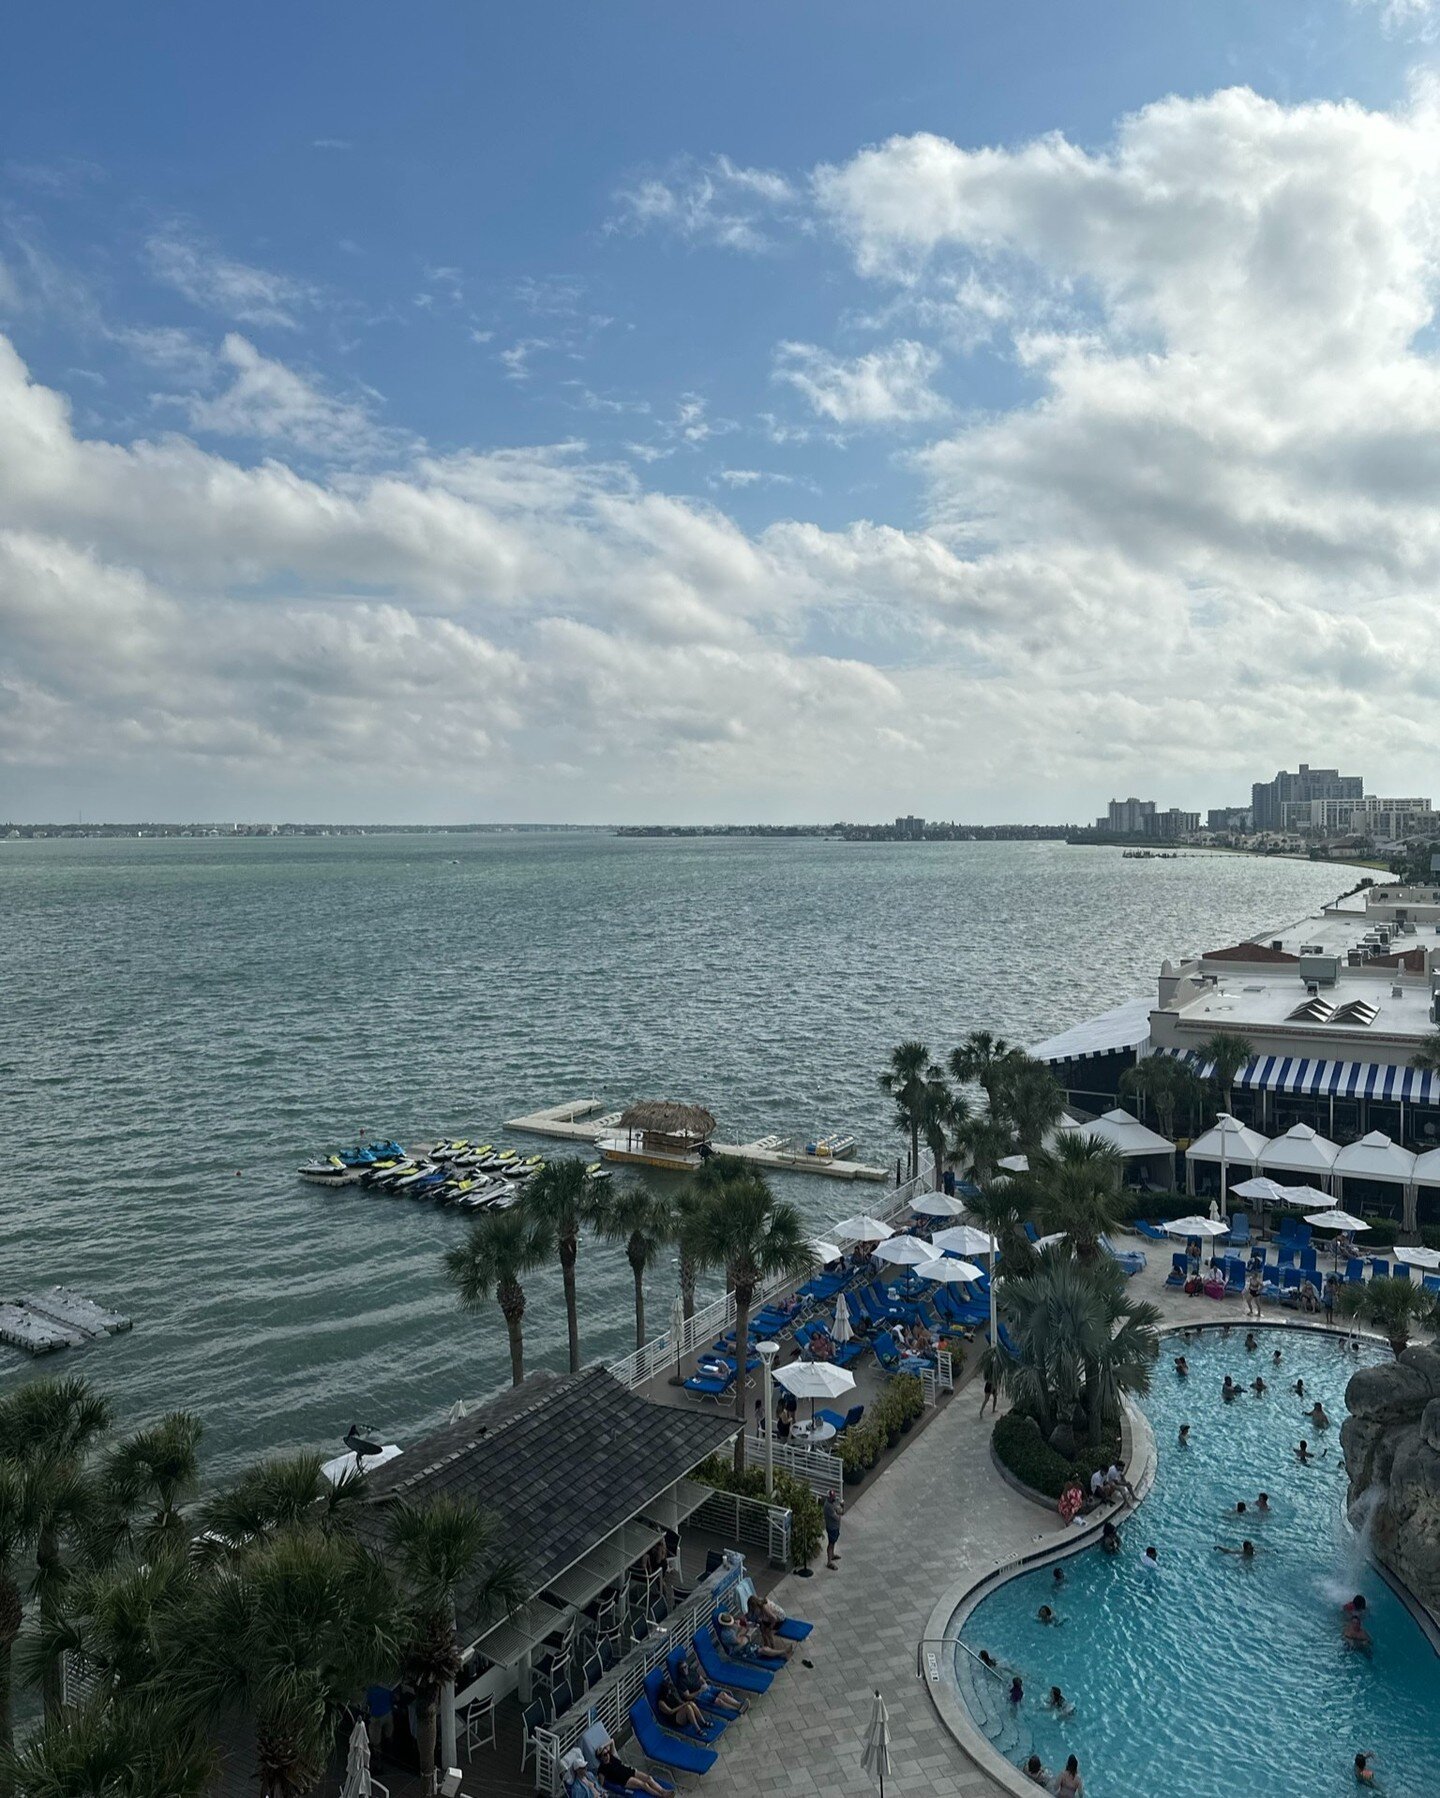 Continuing my #2023RoundUp with this throwback to 🌴 Clearwater, Florida - my happy place! My sister and I had the privilege of visiting this paradise a couple times this year.

The real star of the show in Clearwater? The Columbia Restaurant - one o